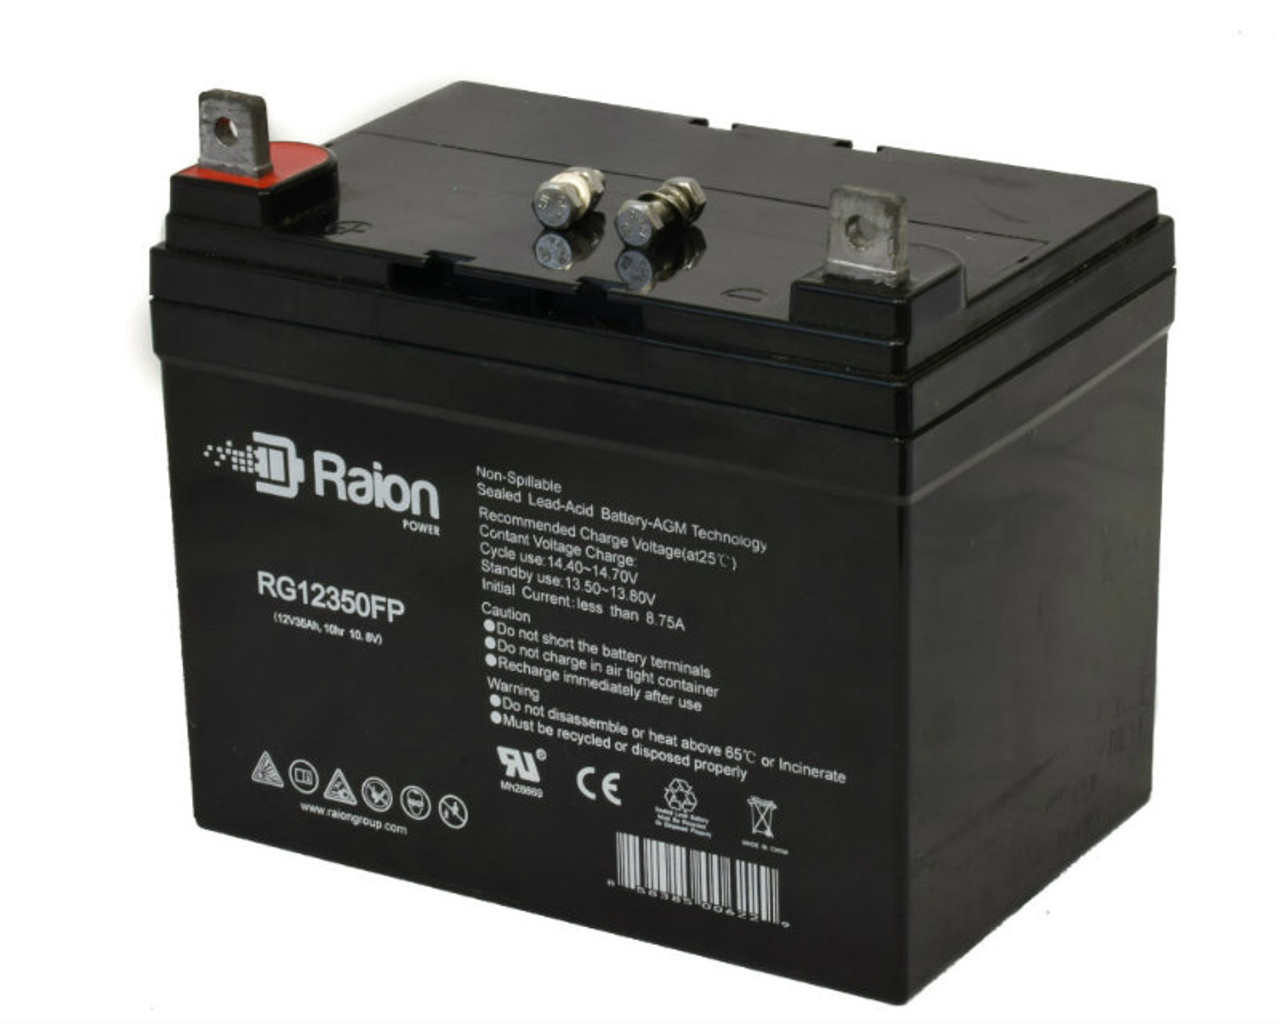 Raion Power Replacement 12V 35Ah RG12350FP Battery for Noma 16HP 43"